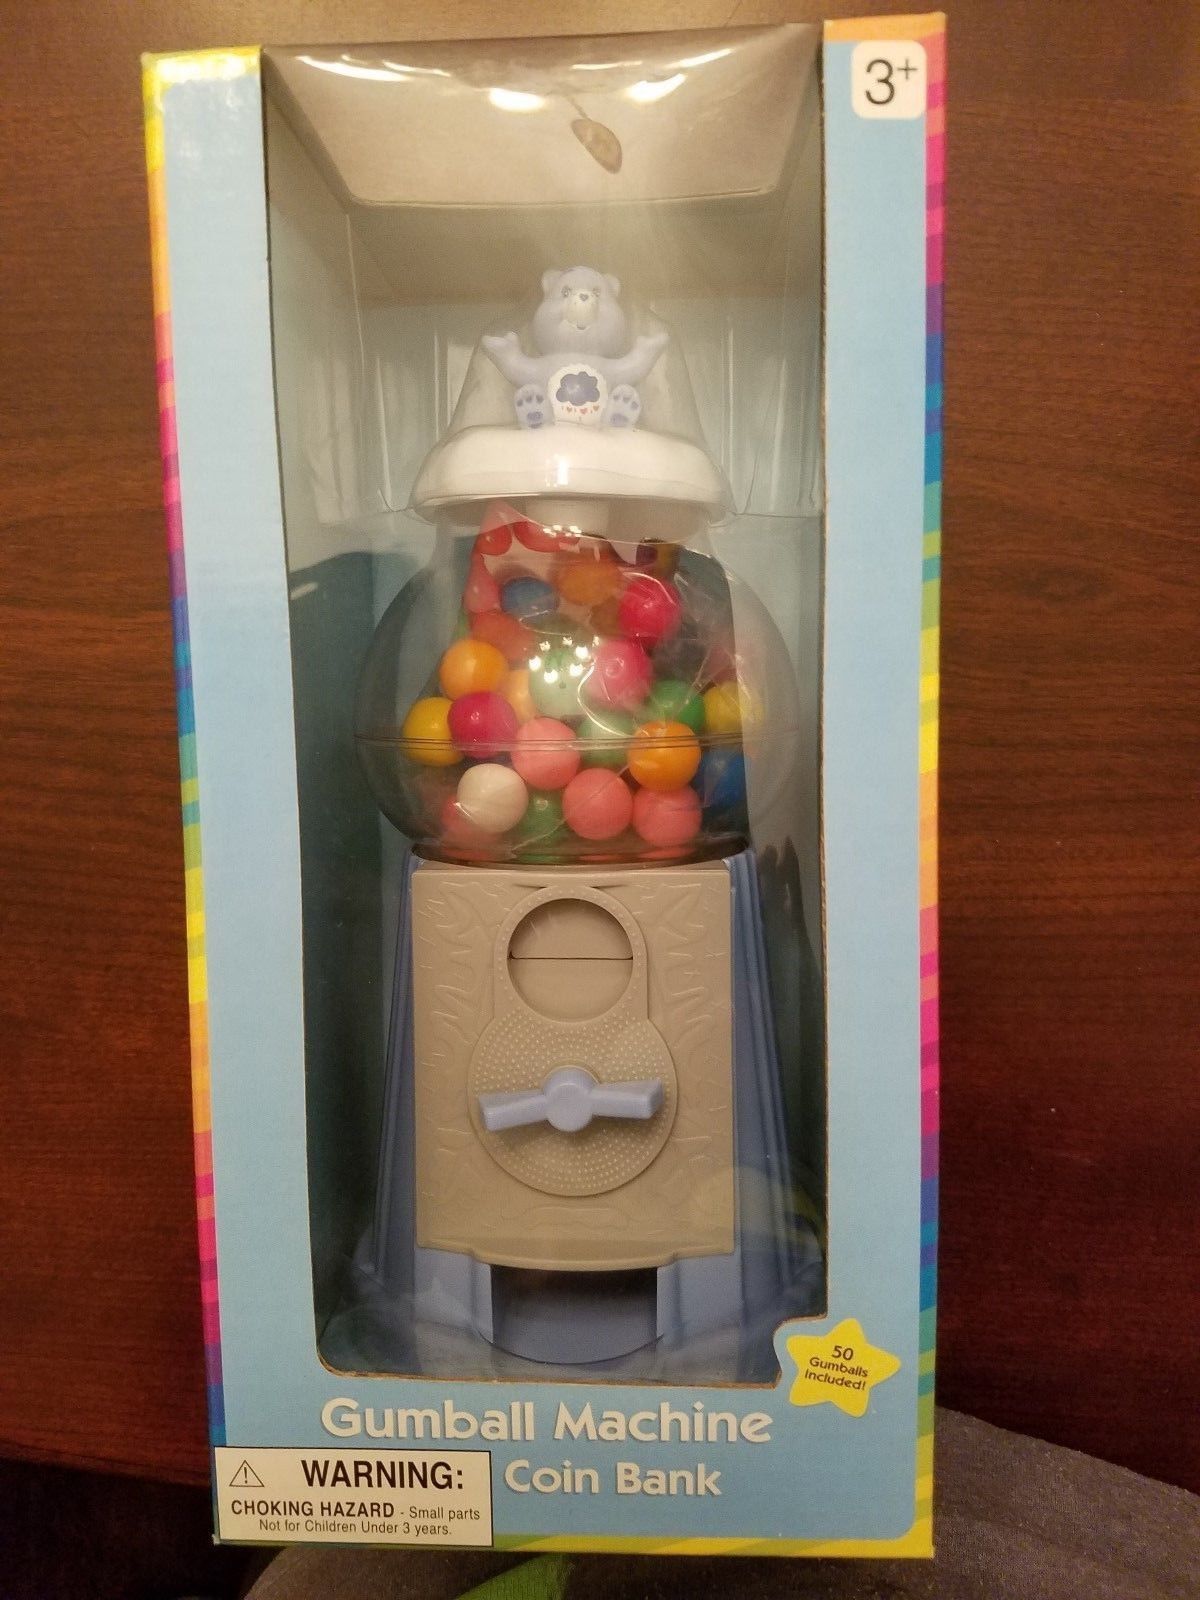 Care Bears Gumball Candy Machine Coin Bank w/ Grumpy Bear Figure Top Collectible